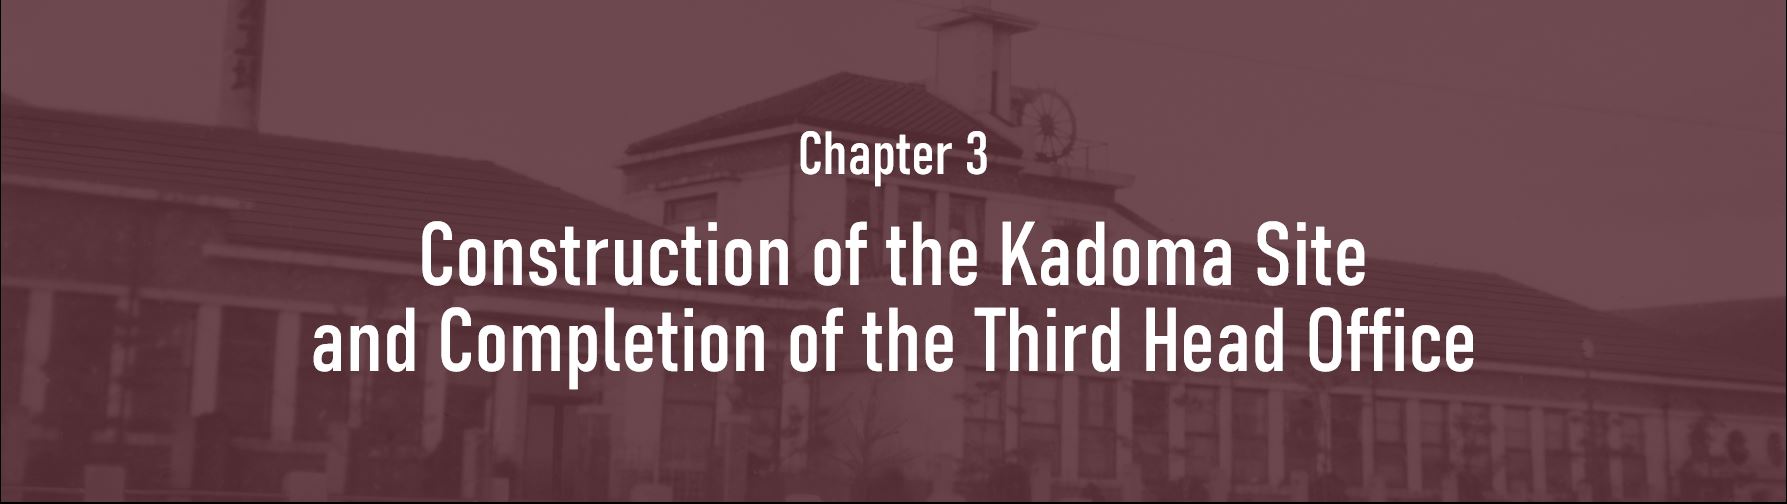 Chapter 3. Construction of the Kadoma Site and Completion of the Third Head Office